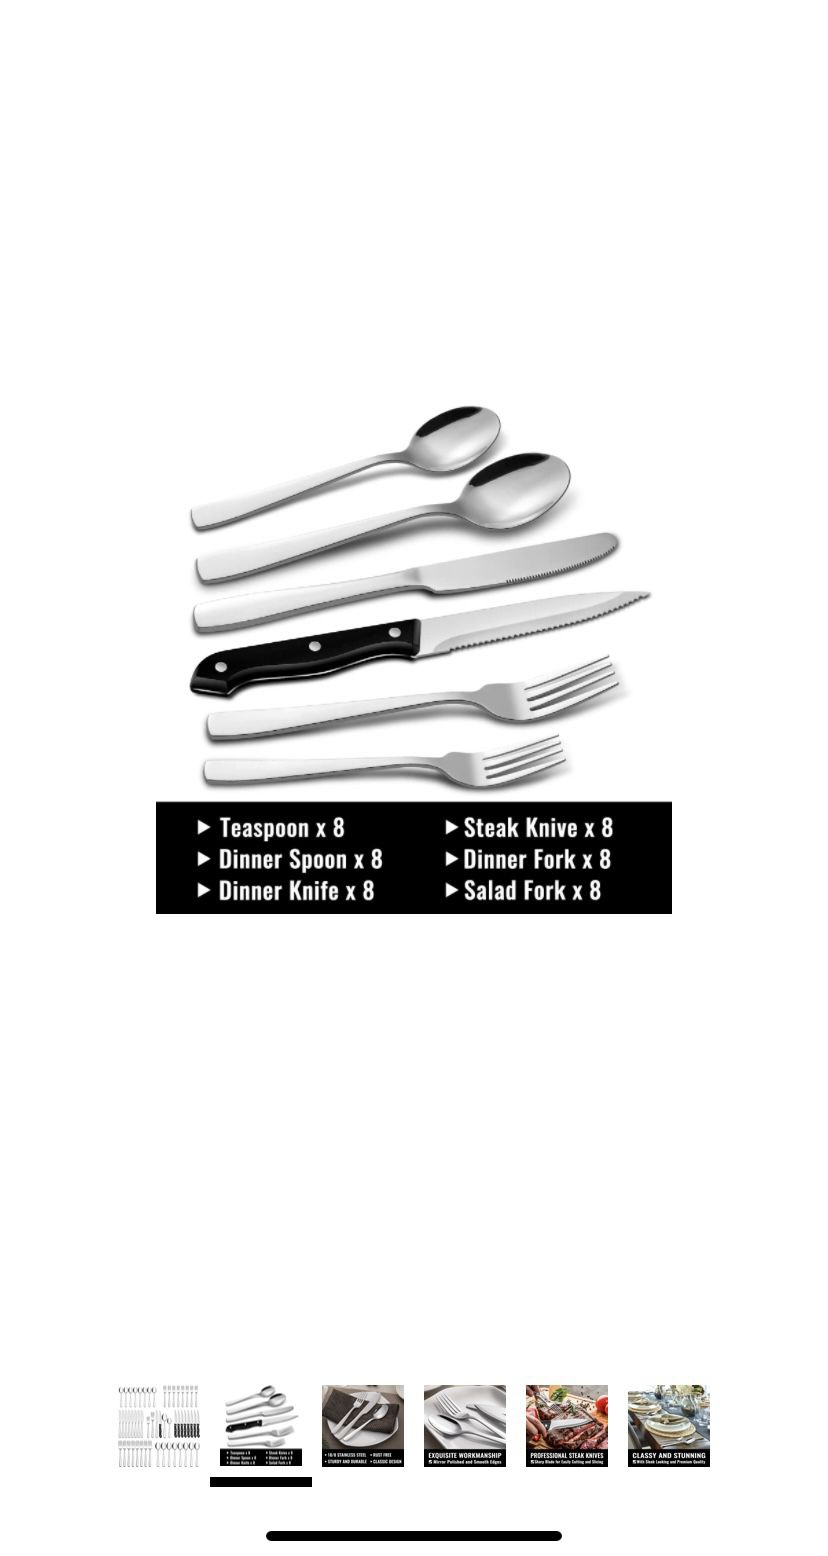 Hiware 48-Piece Silverware Set with Steak Knives for 8, Stainless Steel Flatware Cutlery Set for Home Kitchen Restaurant Hotel, Mirror Polished